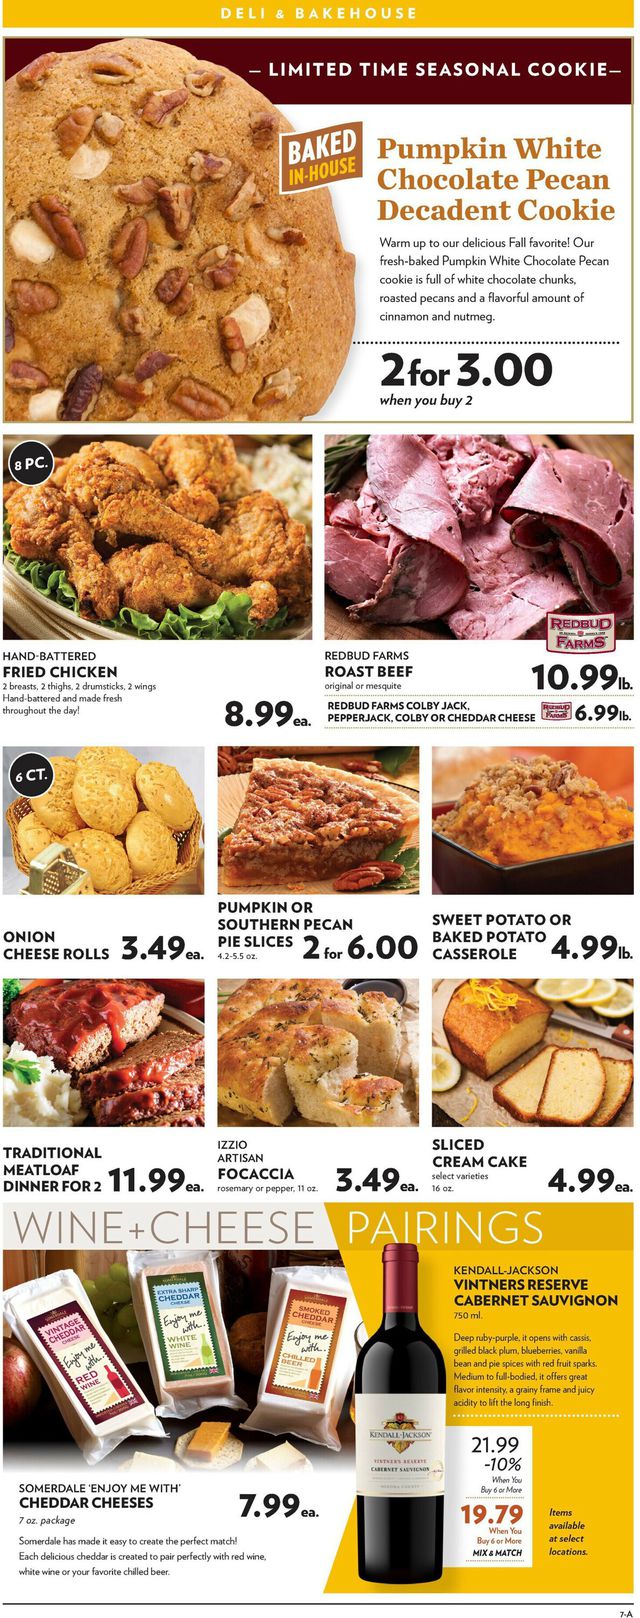 Reasor's Ad from 09/21/2022